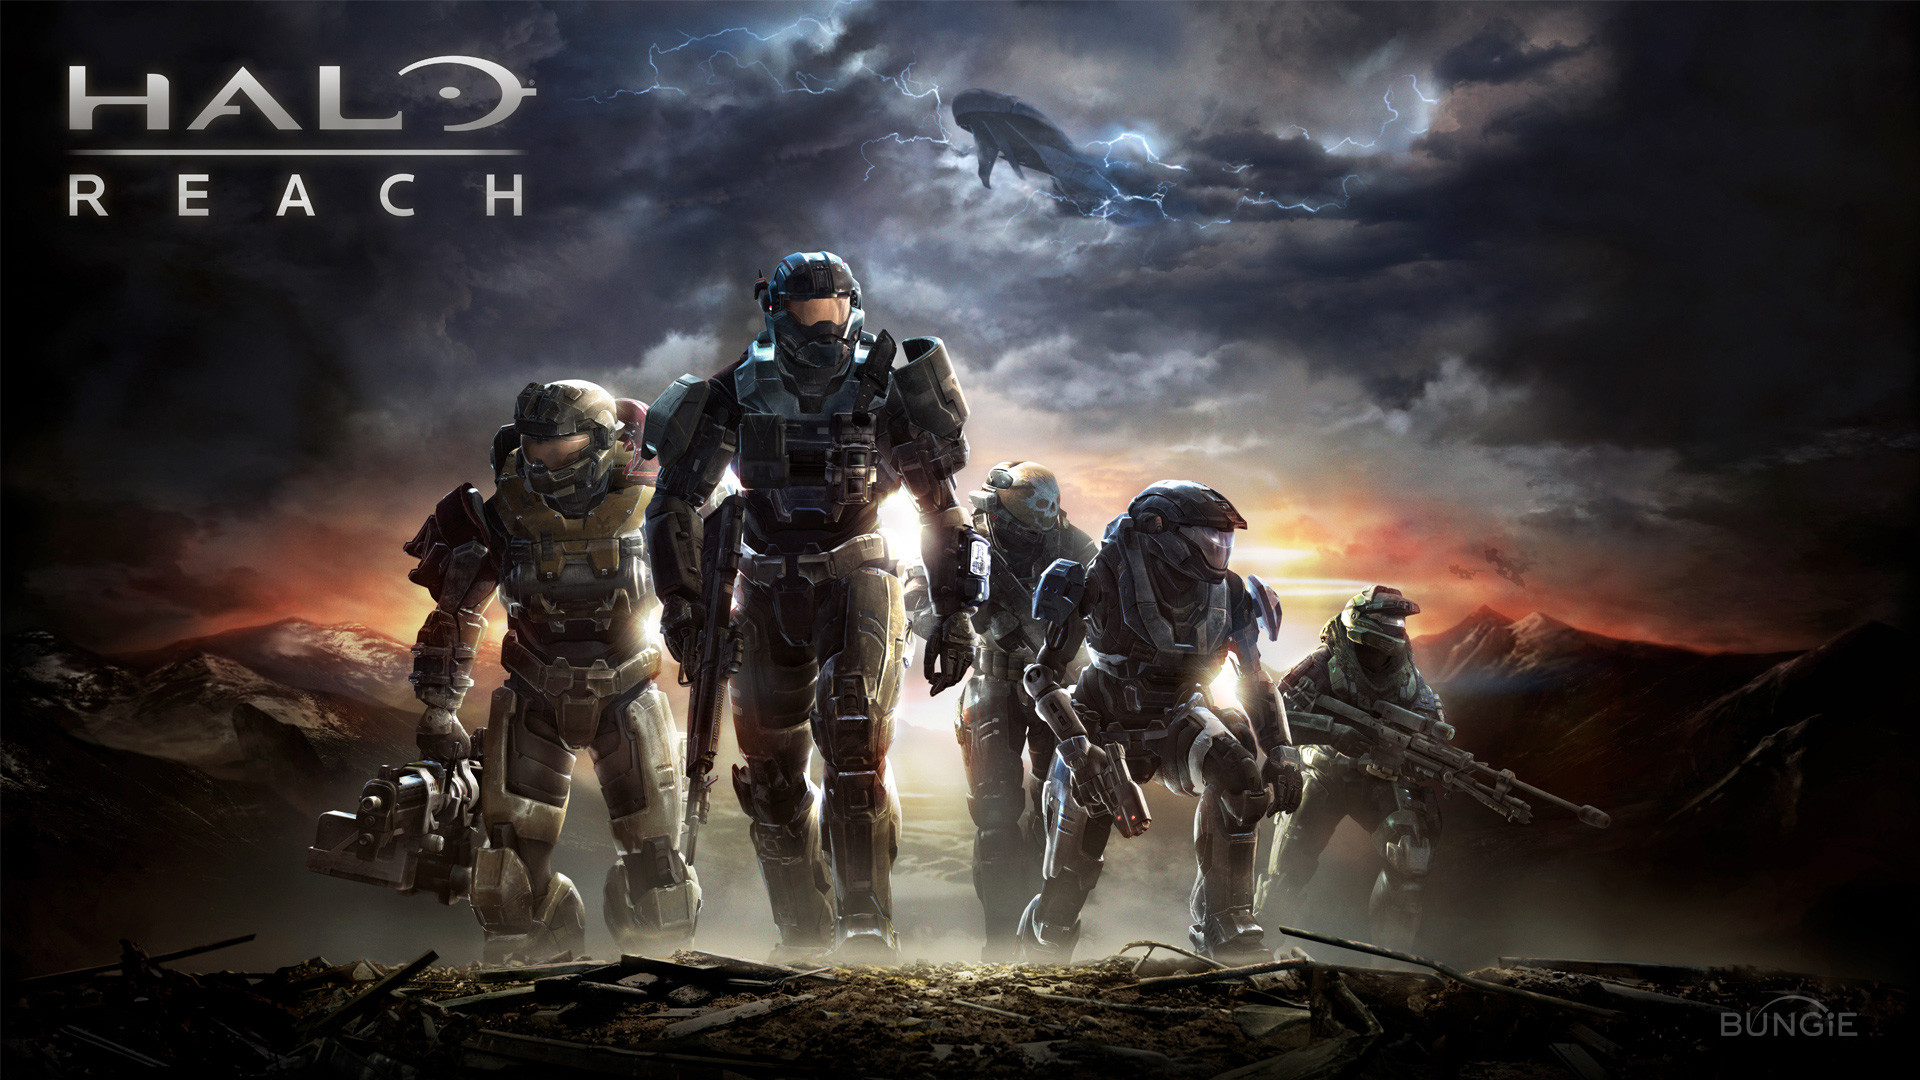 1920x1080 All About Halo images Halo Wallpapers HD wallpaper and background photos